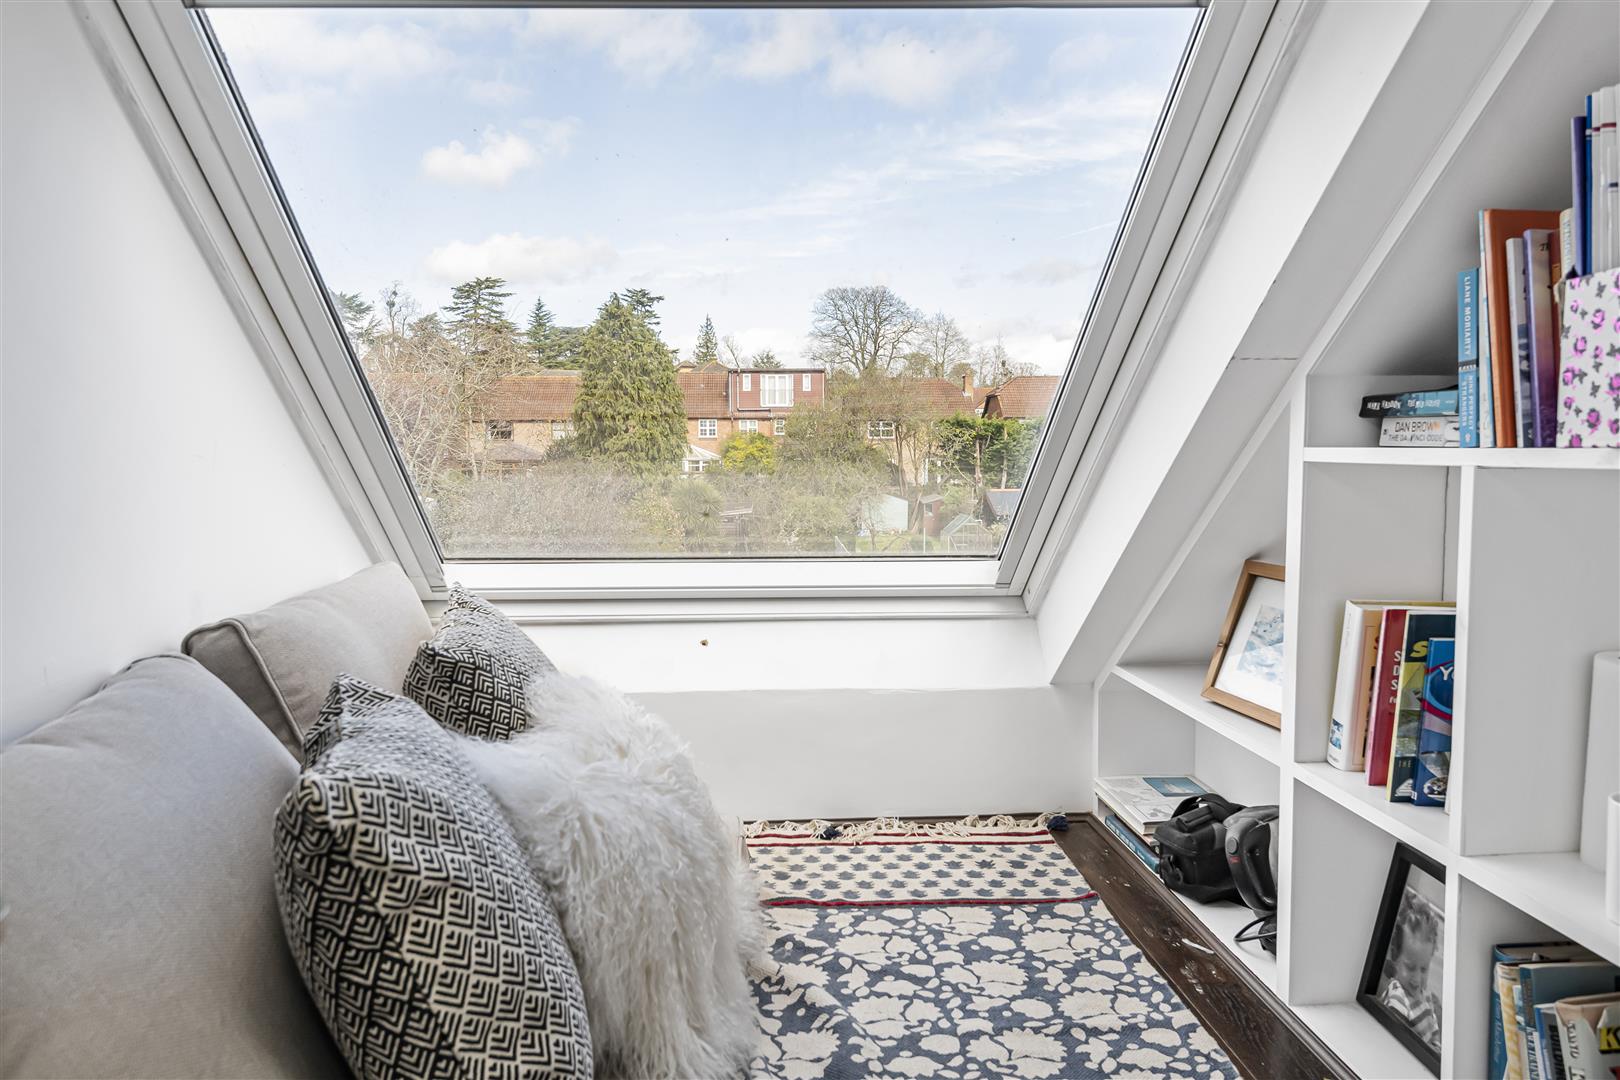 South View Avenue Caversham house for sale in Reading